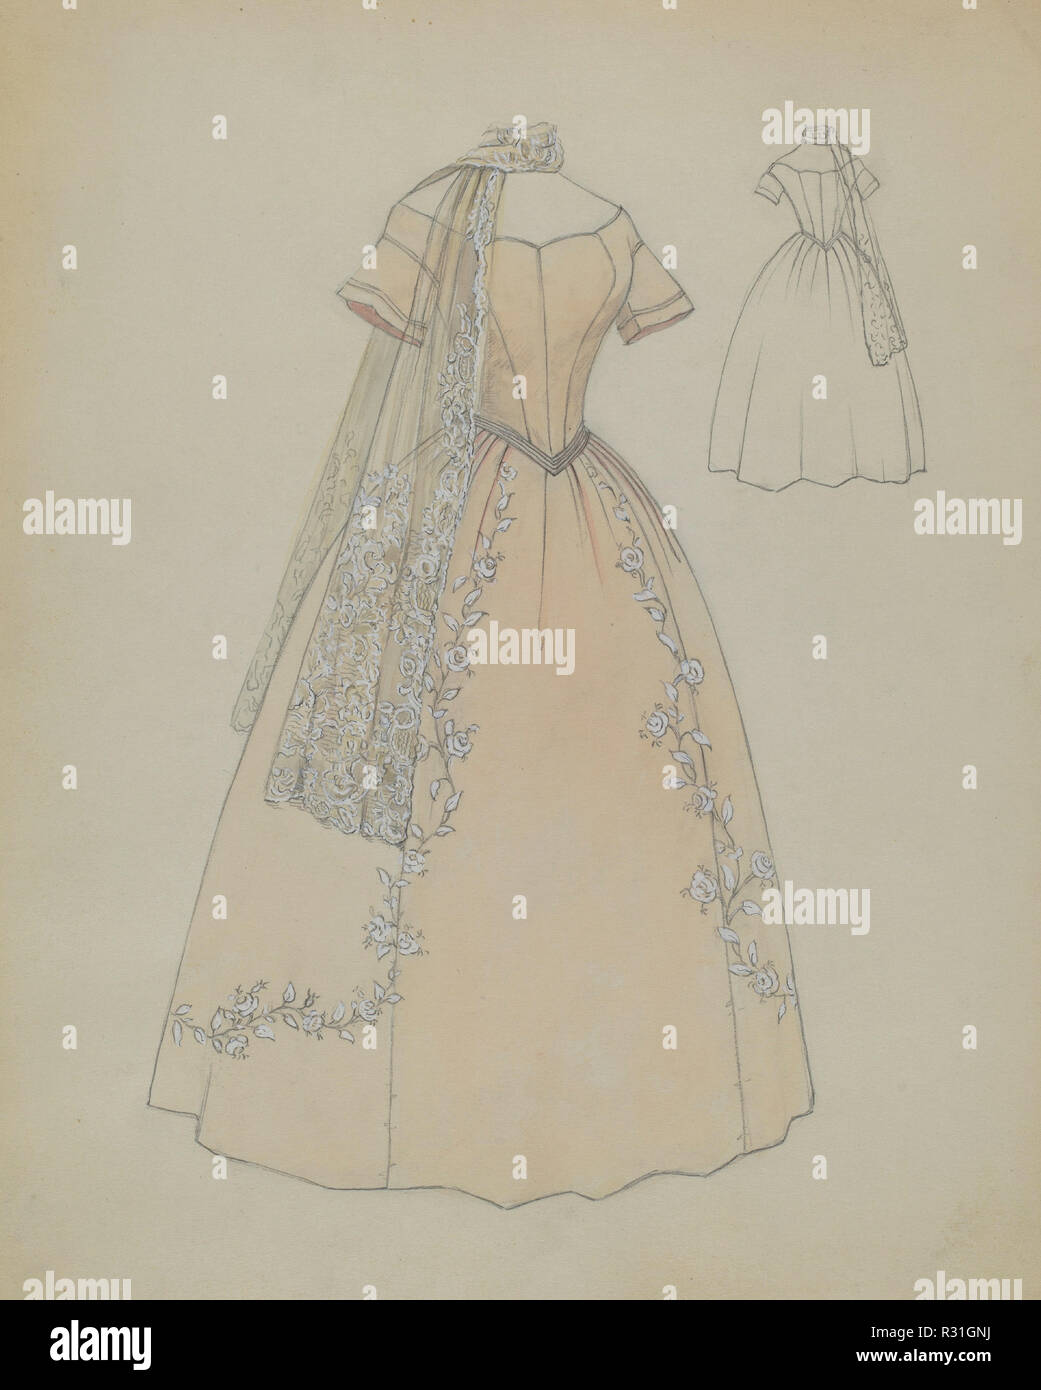 Dress. Dated: c. 1936. Dimensions: overall: 29.8 x 23.2 cm (11 3/4 x 9 1/8 in.). Medium: watercolor, graphite, and gouache on paper. Museum: National Gallery of Art, Washington DC. Author: Jessie M. Benge. Stock Photo